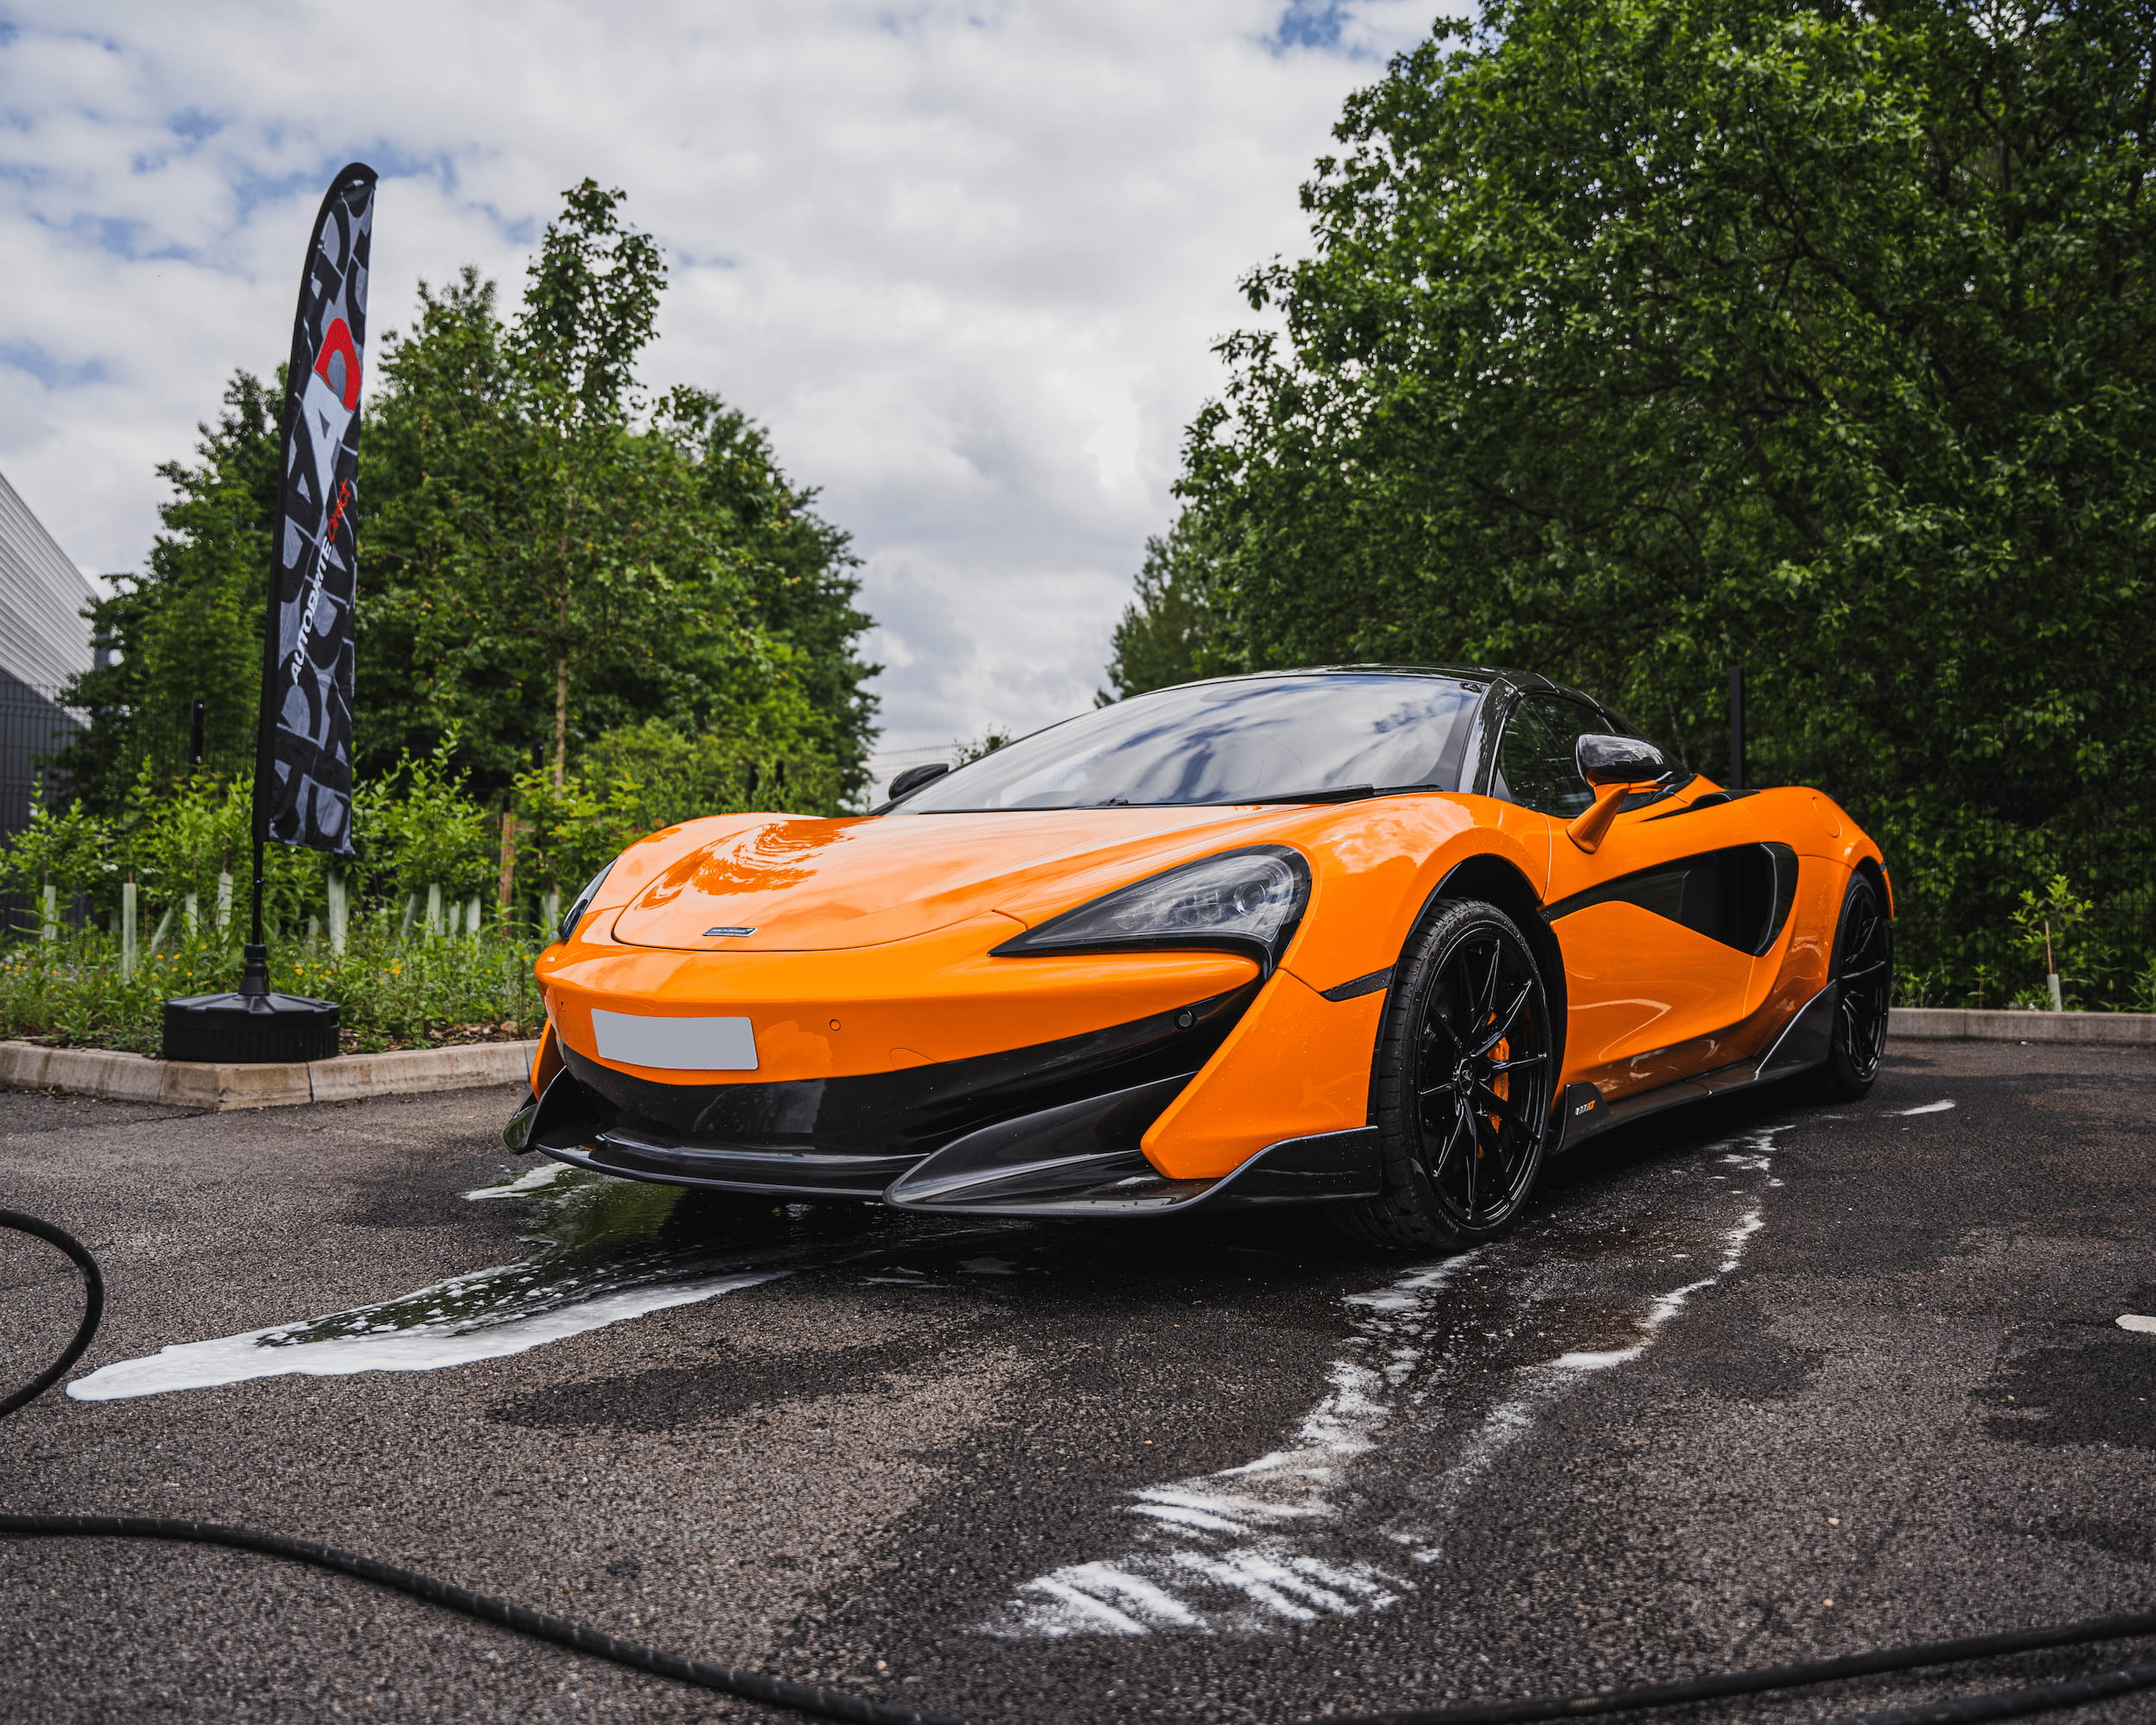 Orange Mclaren being cleaned with a AD flagpole in the background